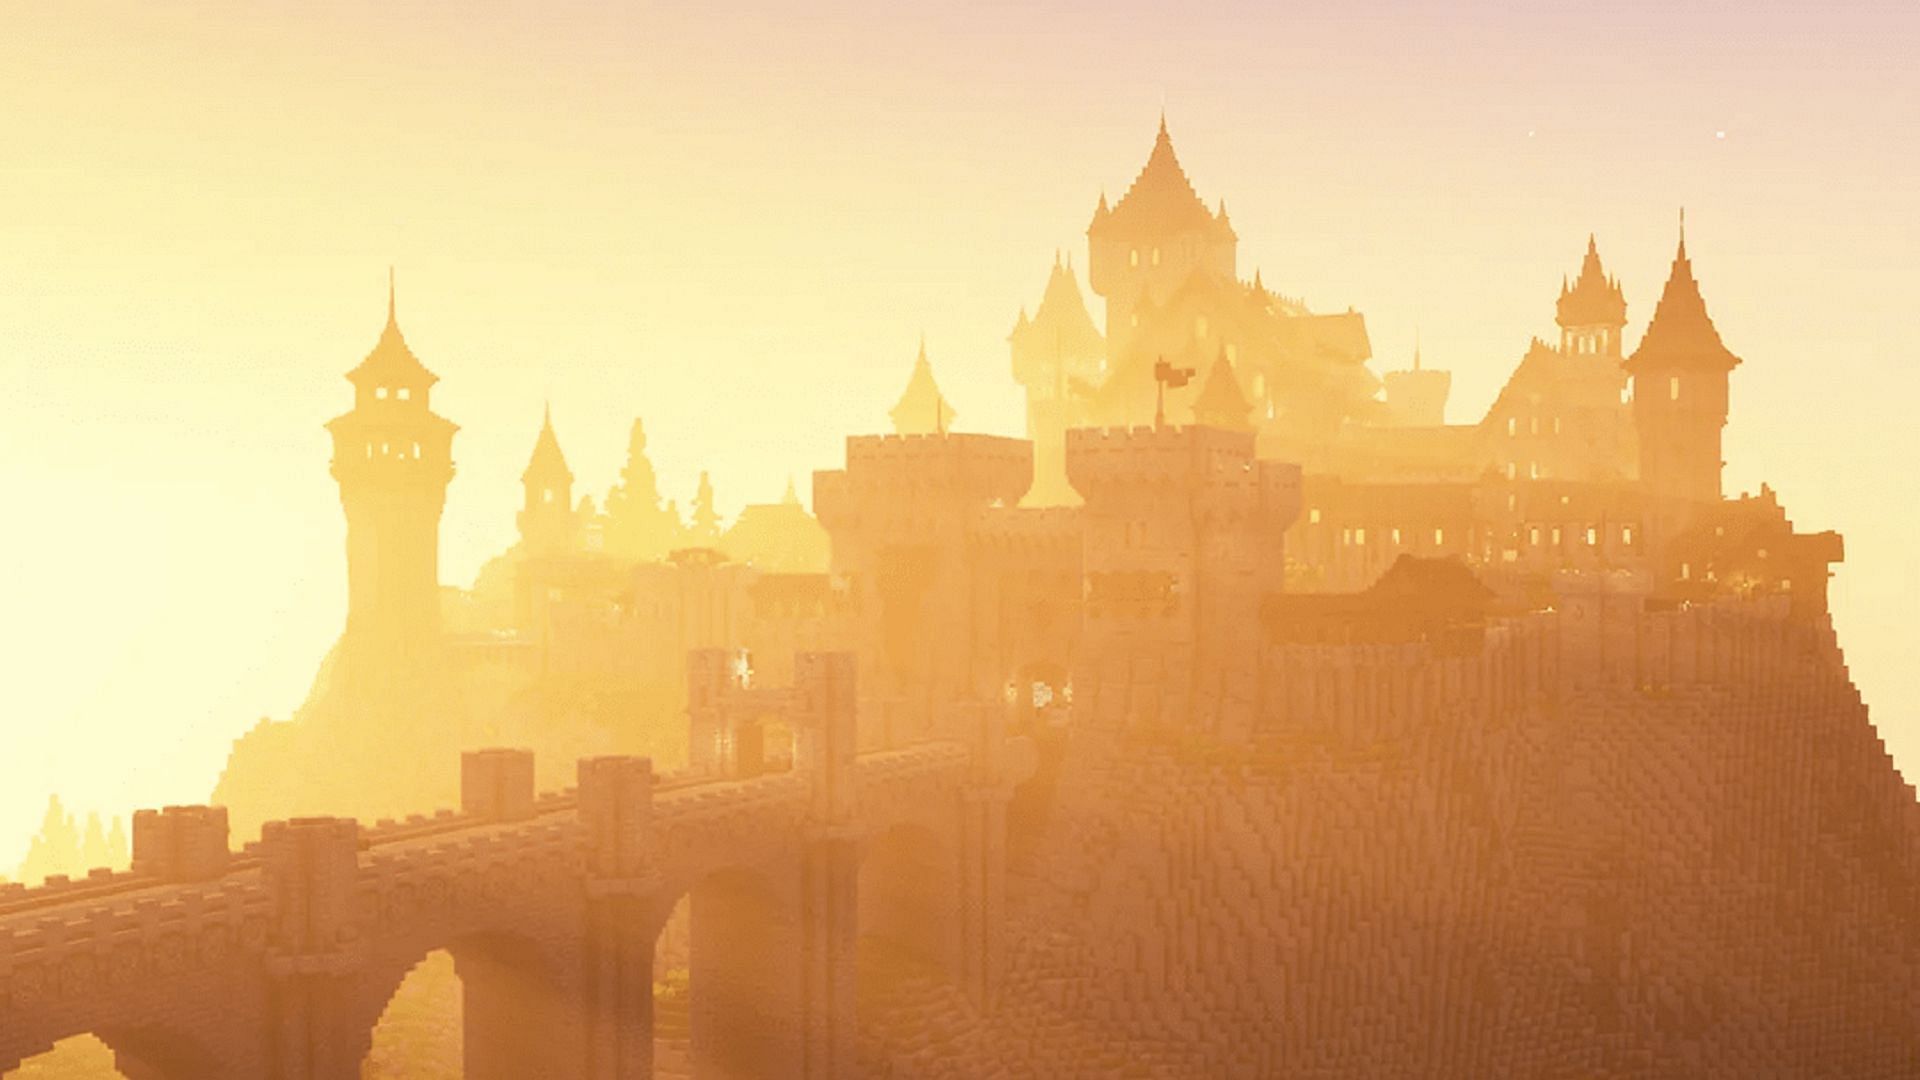 A group of Minecraft players recently shared their massive medieval kingdom build (Image via Pixelbiesterofficial/Reddit)